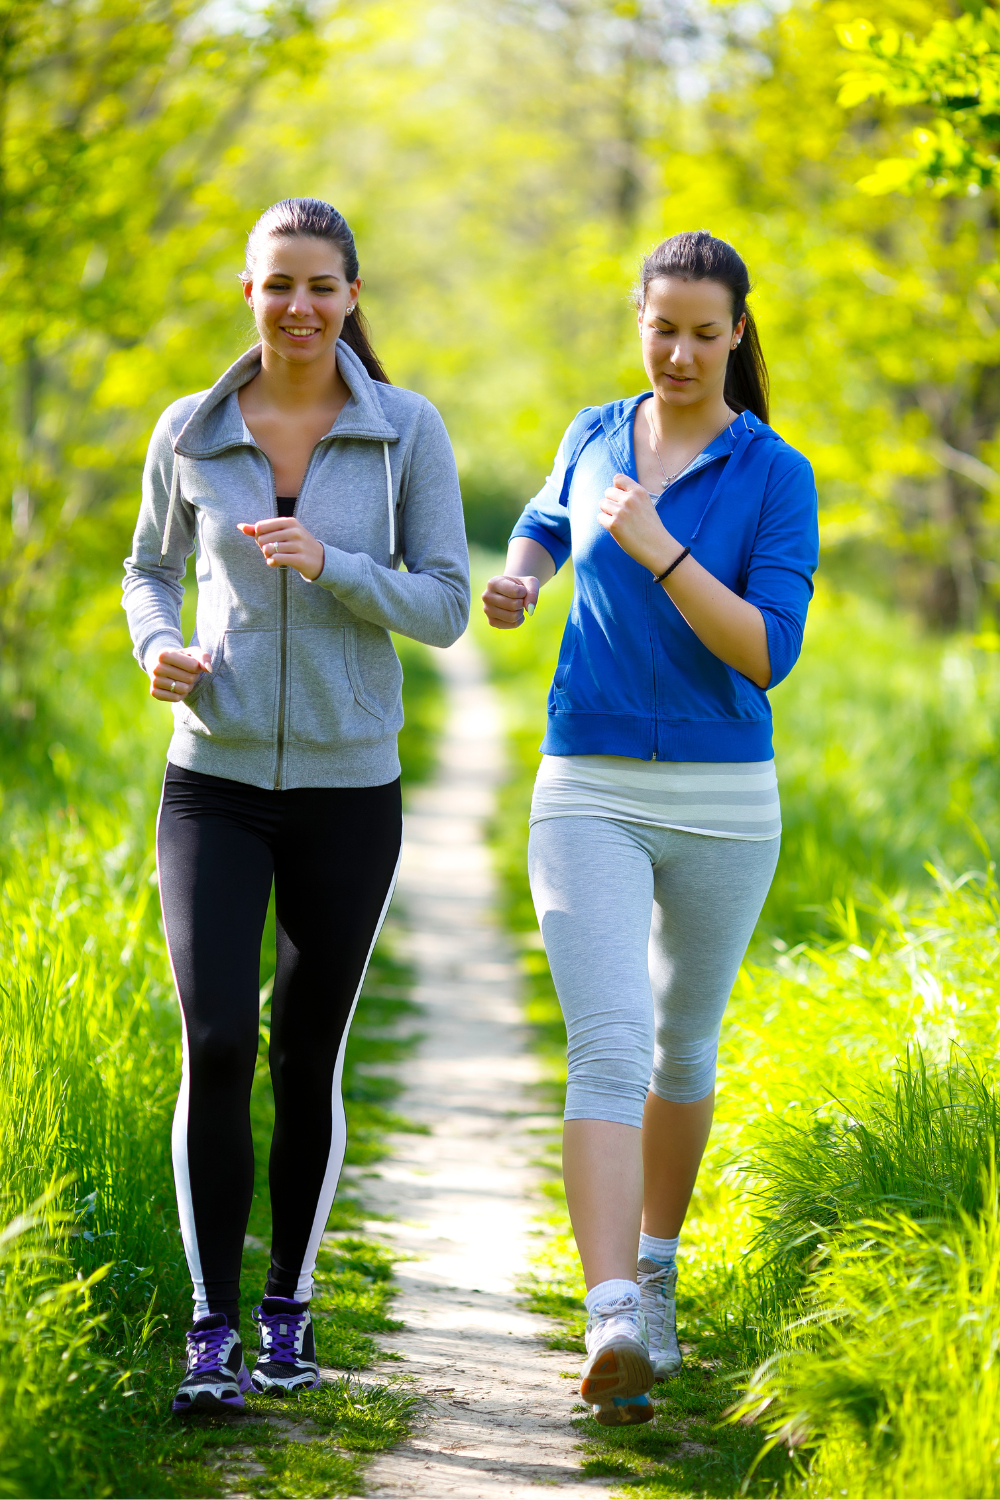 Benefits of walking a mile a day